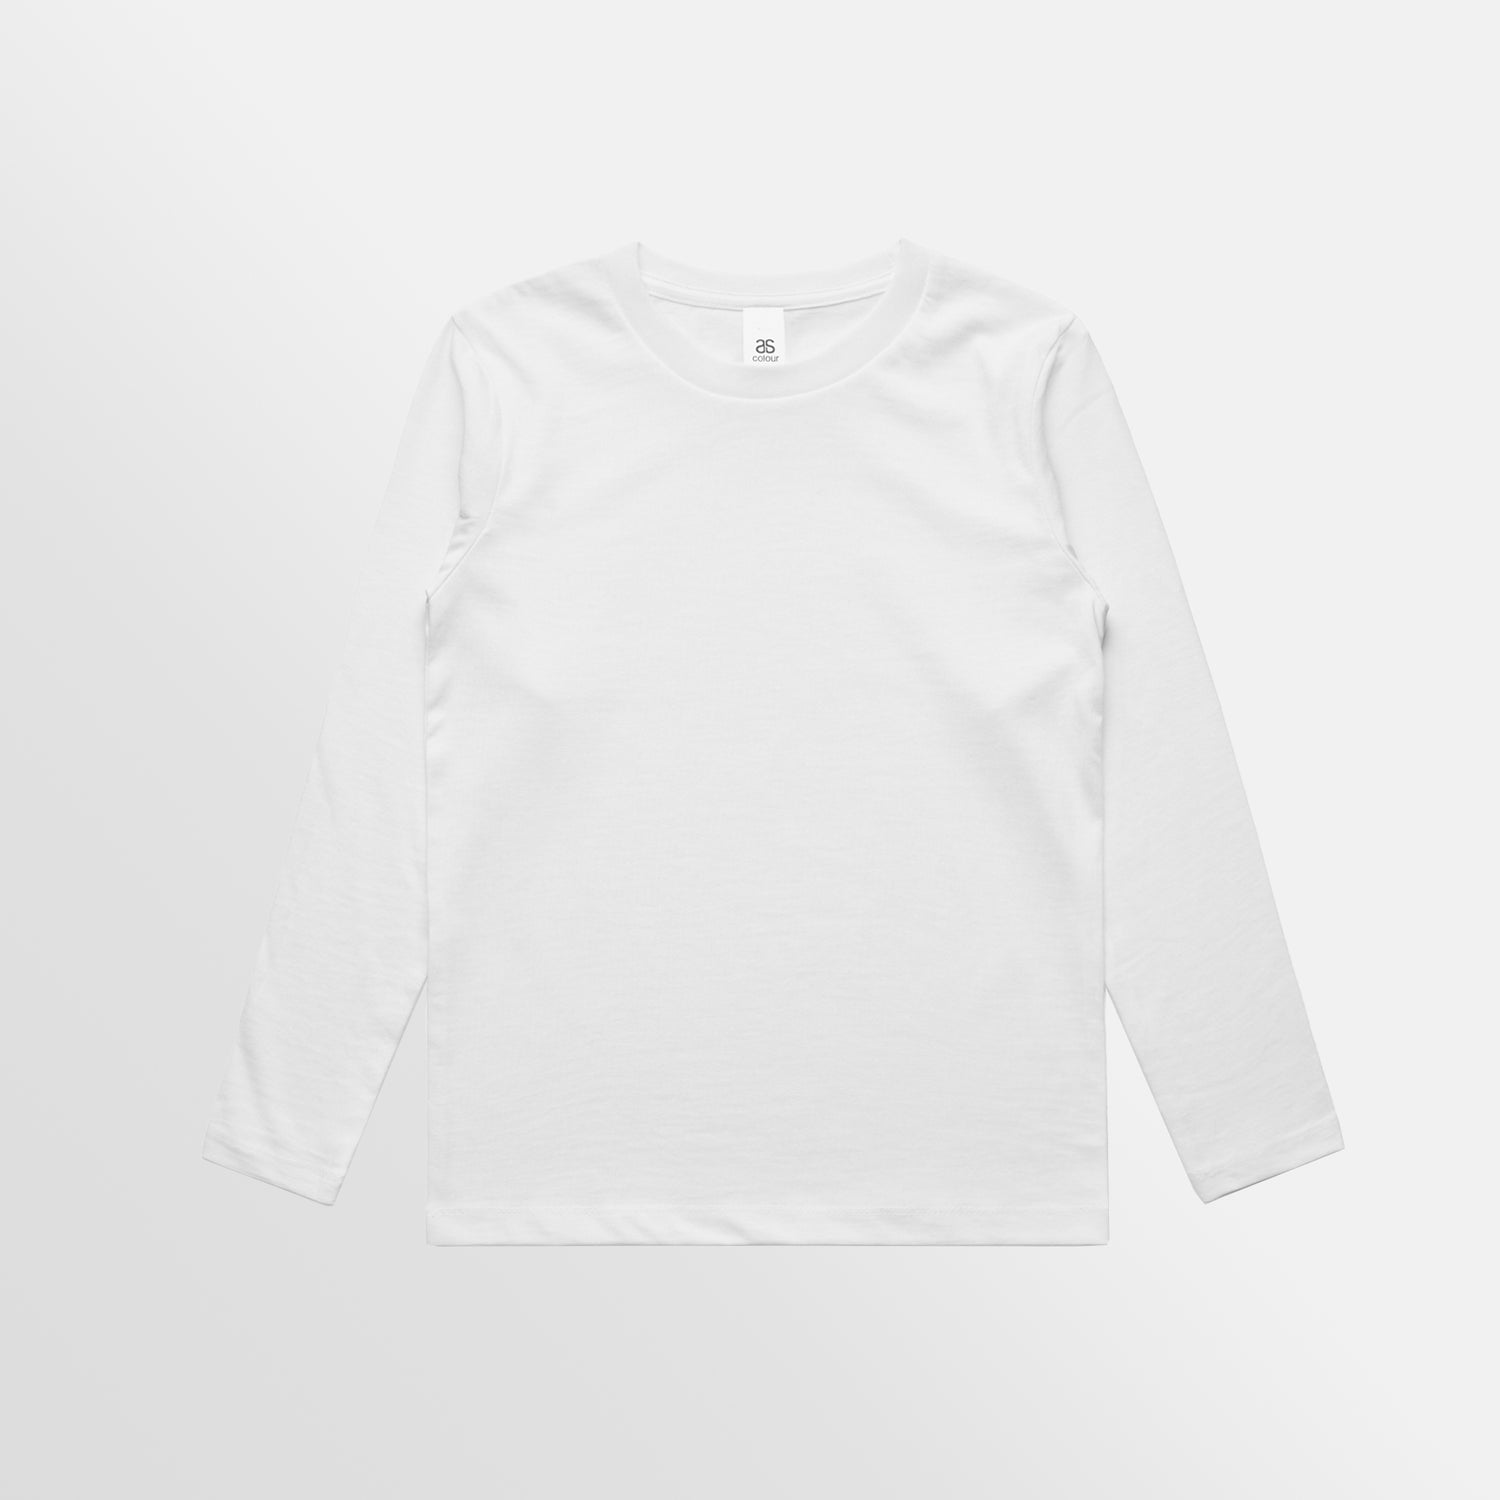 Premium Youth Long Sleeve Tee - On Request